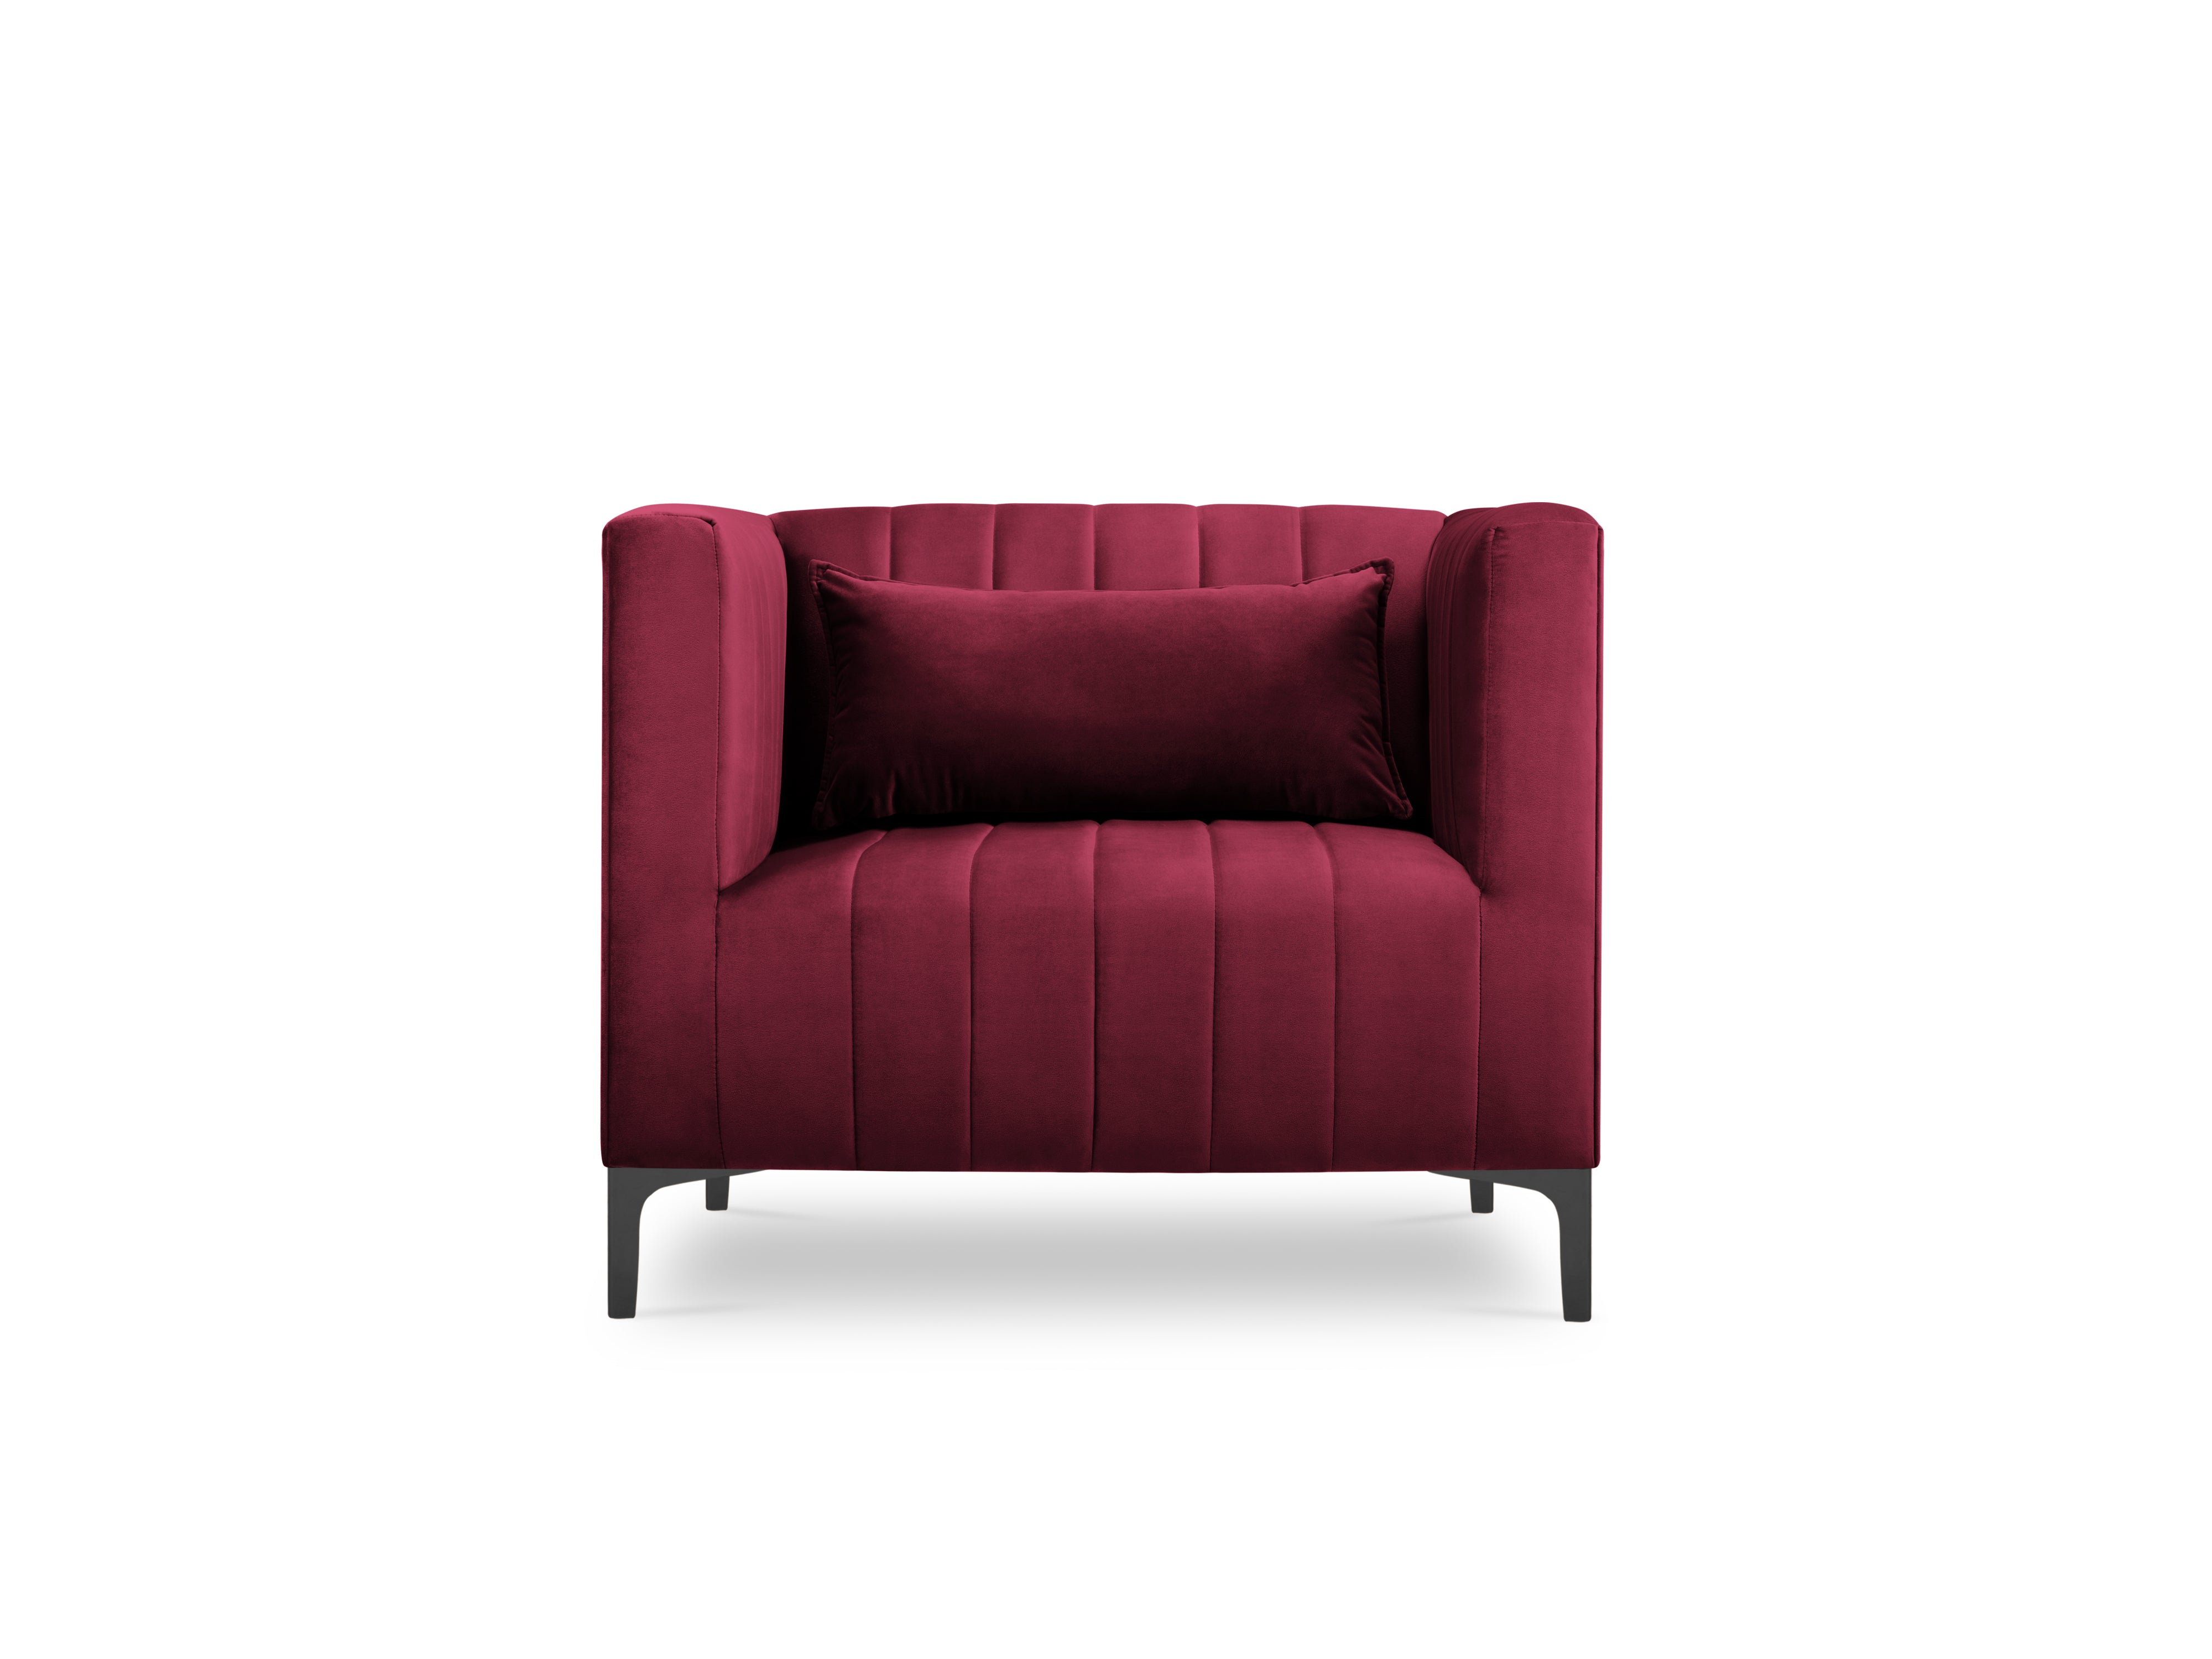 Annite armchair with stitching